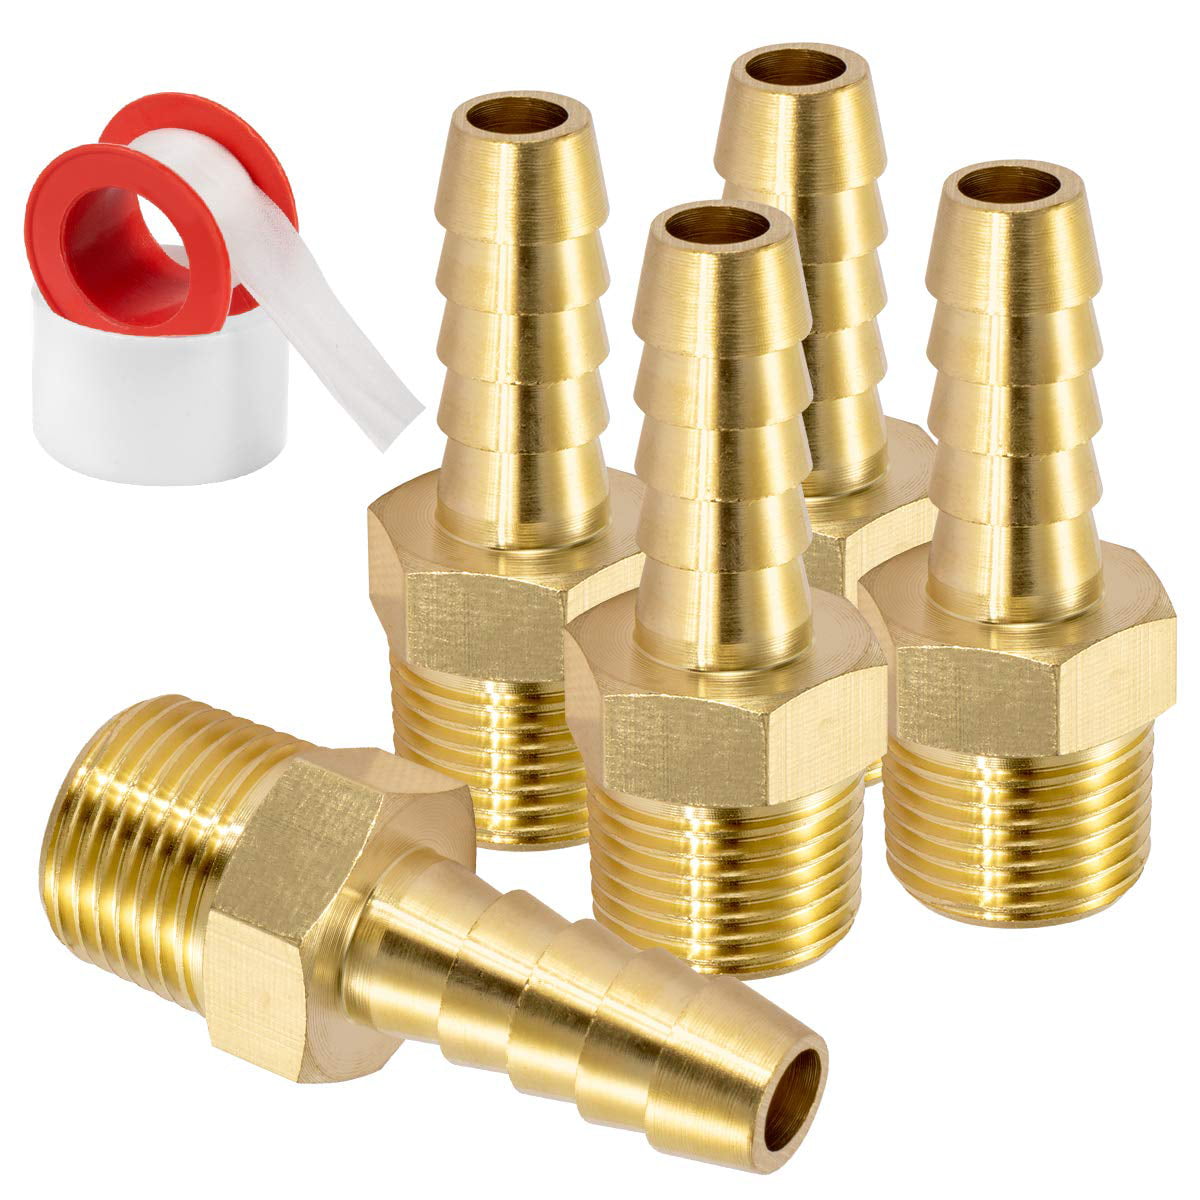 BRASS CORED HEX PLUG MALE 1" ONE INCH NPT THREADS PIPE FITTING AIR WATER   QTY 5 